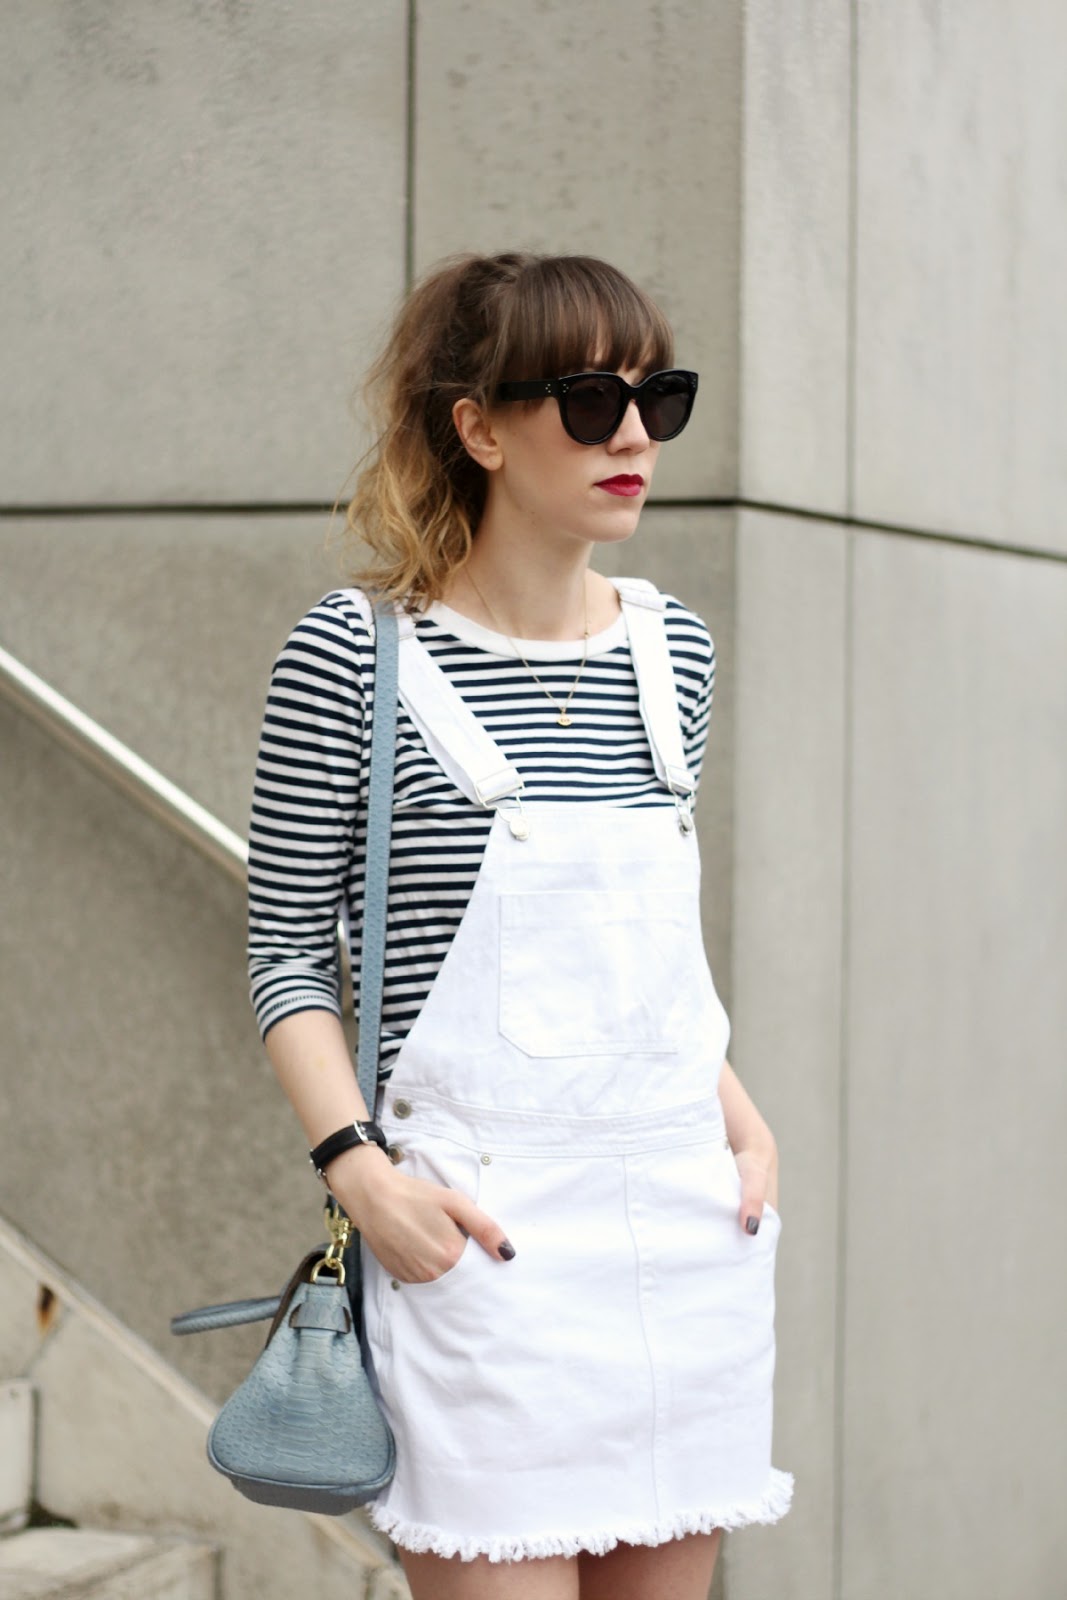 TODAY: The Dungaree Skirt - The Lovecats Inc